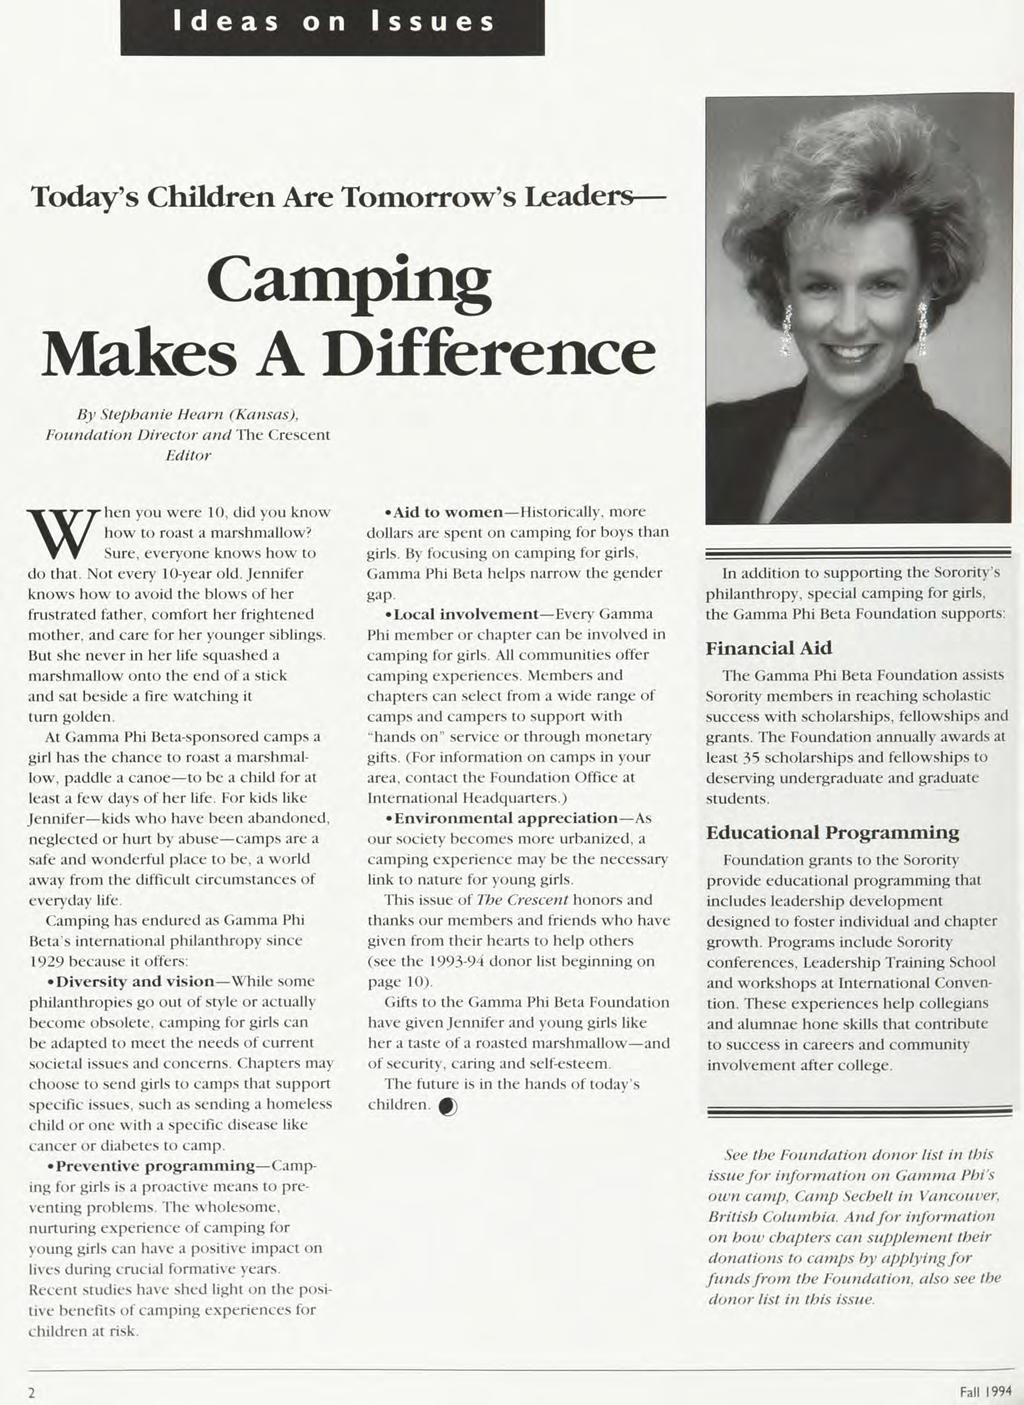 Ideas on Issues Today's Children Are Tomorrow's Leaders Camping Makes A Difference By Stephanie Hearn (Kansas), Foundation Director and The Crescent Editor When you were 10, did you know how to roast